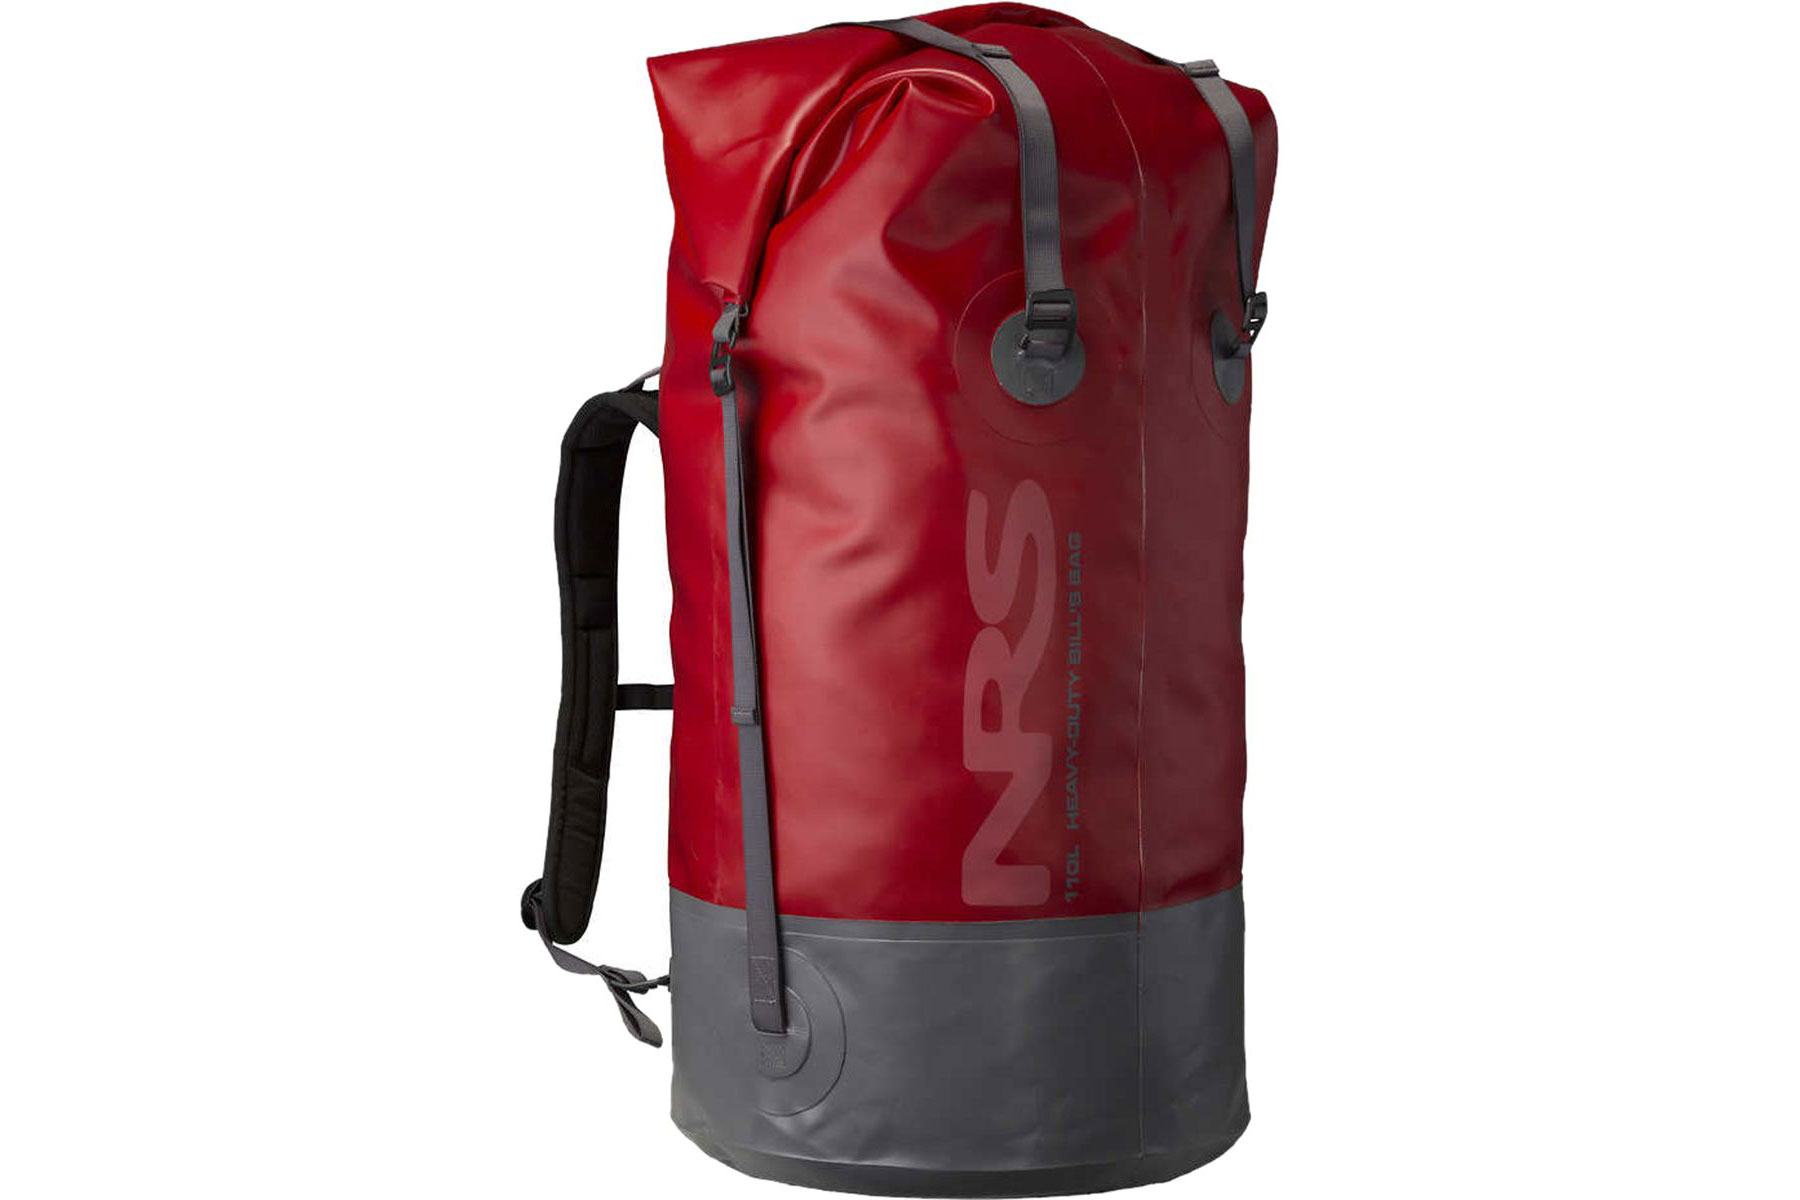 A red NRS Heavy-Duty Bill's Bag Dry Bag on a white background.